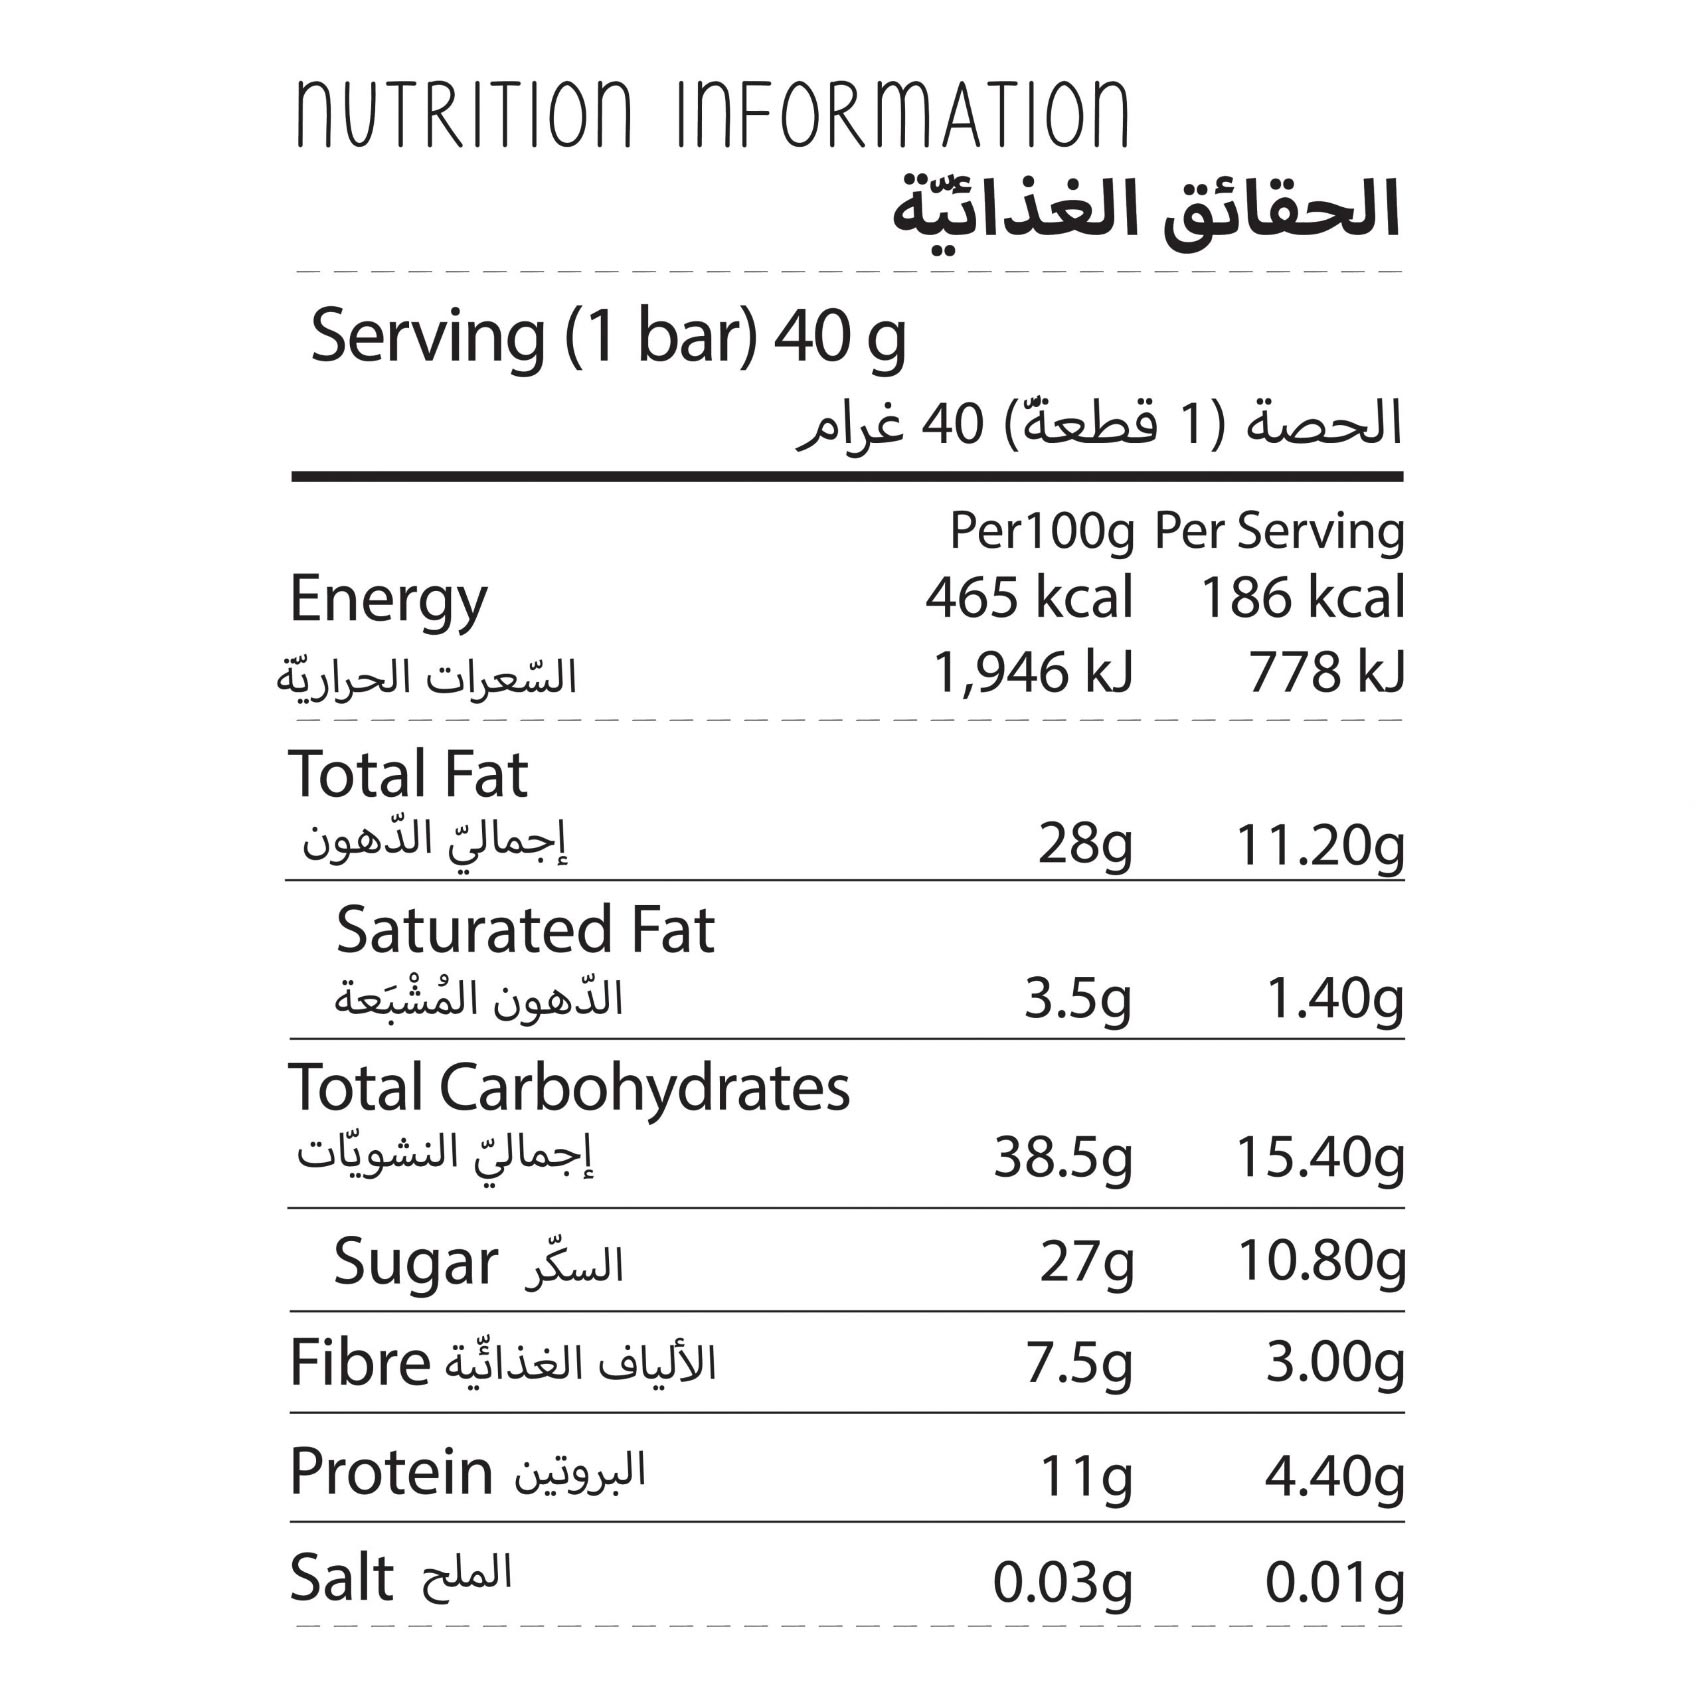 Taqabar Almond And Rose Dried Fruit And Nut Energy Bar 50g